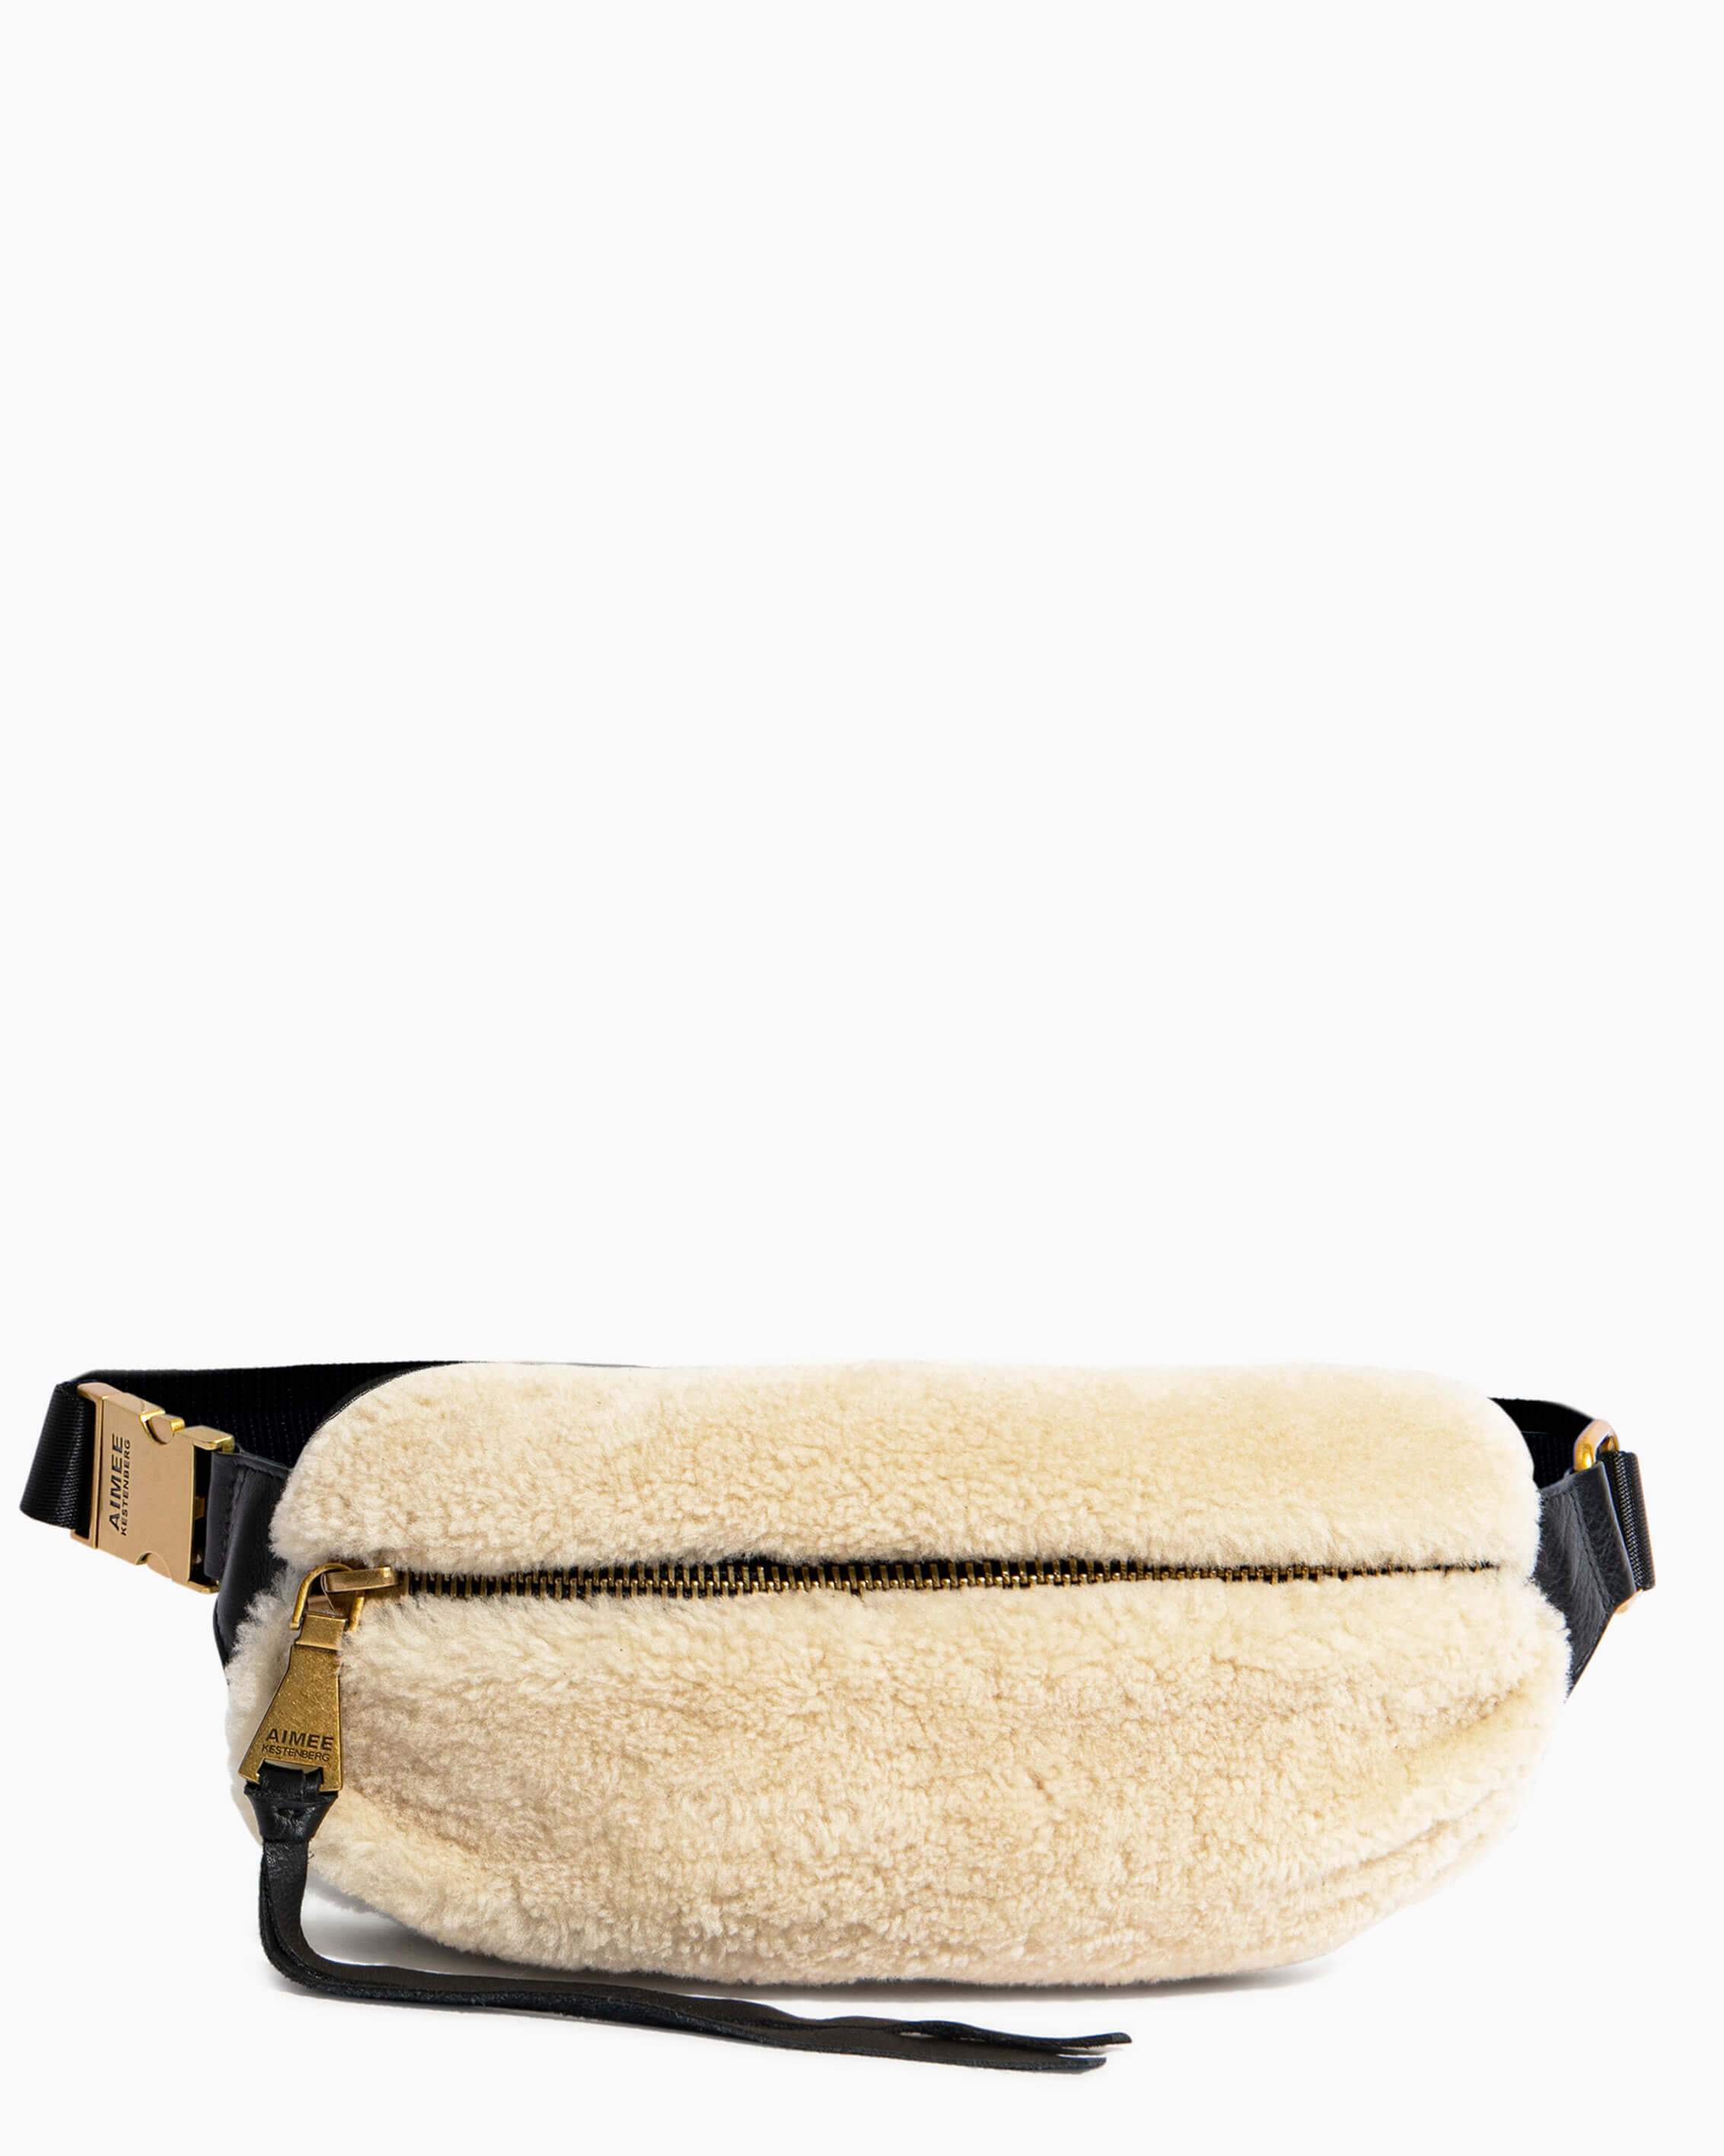 Aimee Kestenberg - No matter what the occasion, the Milan Bum Bag